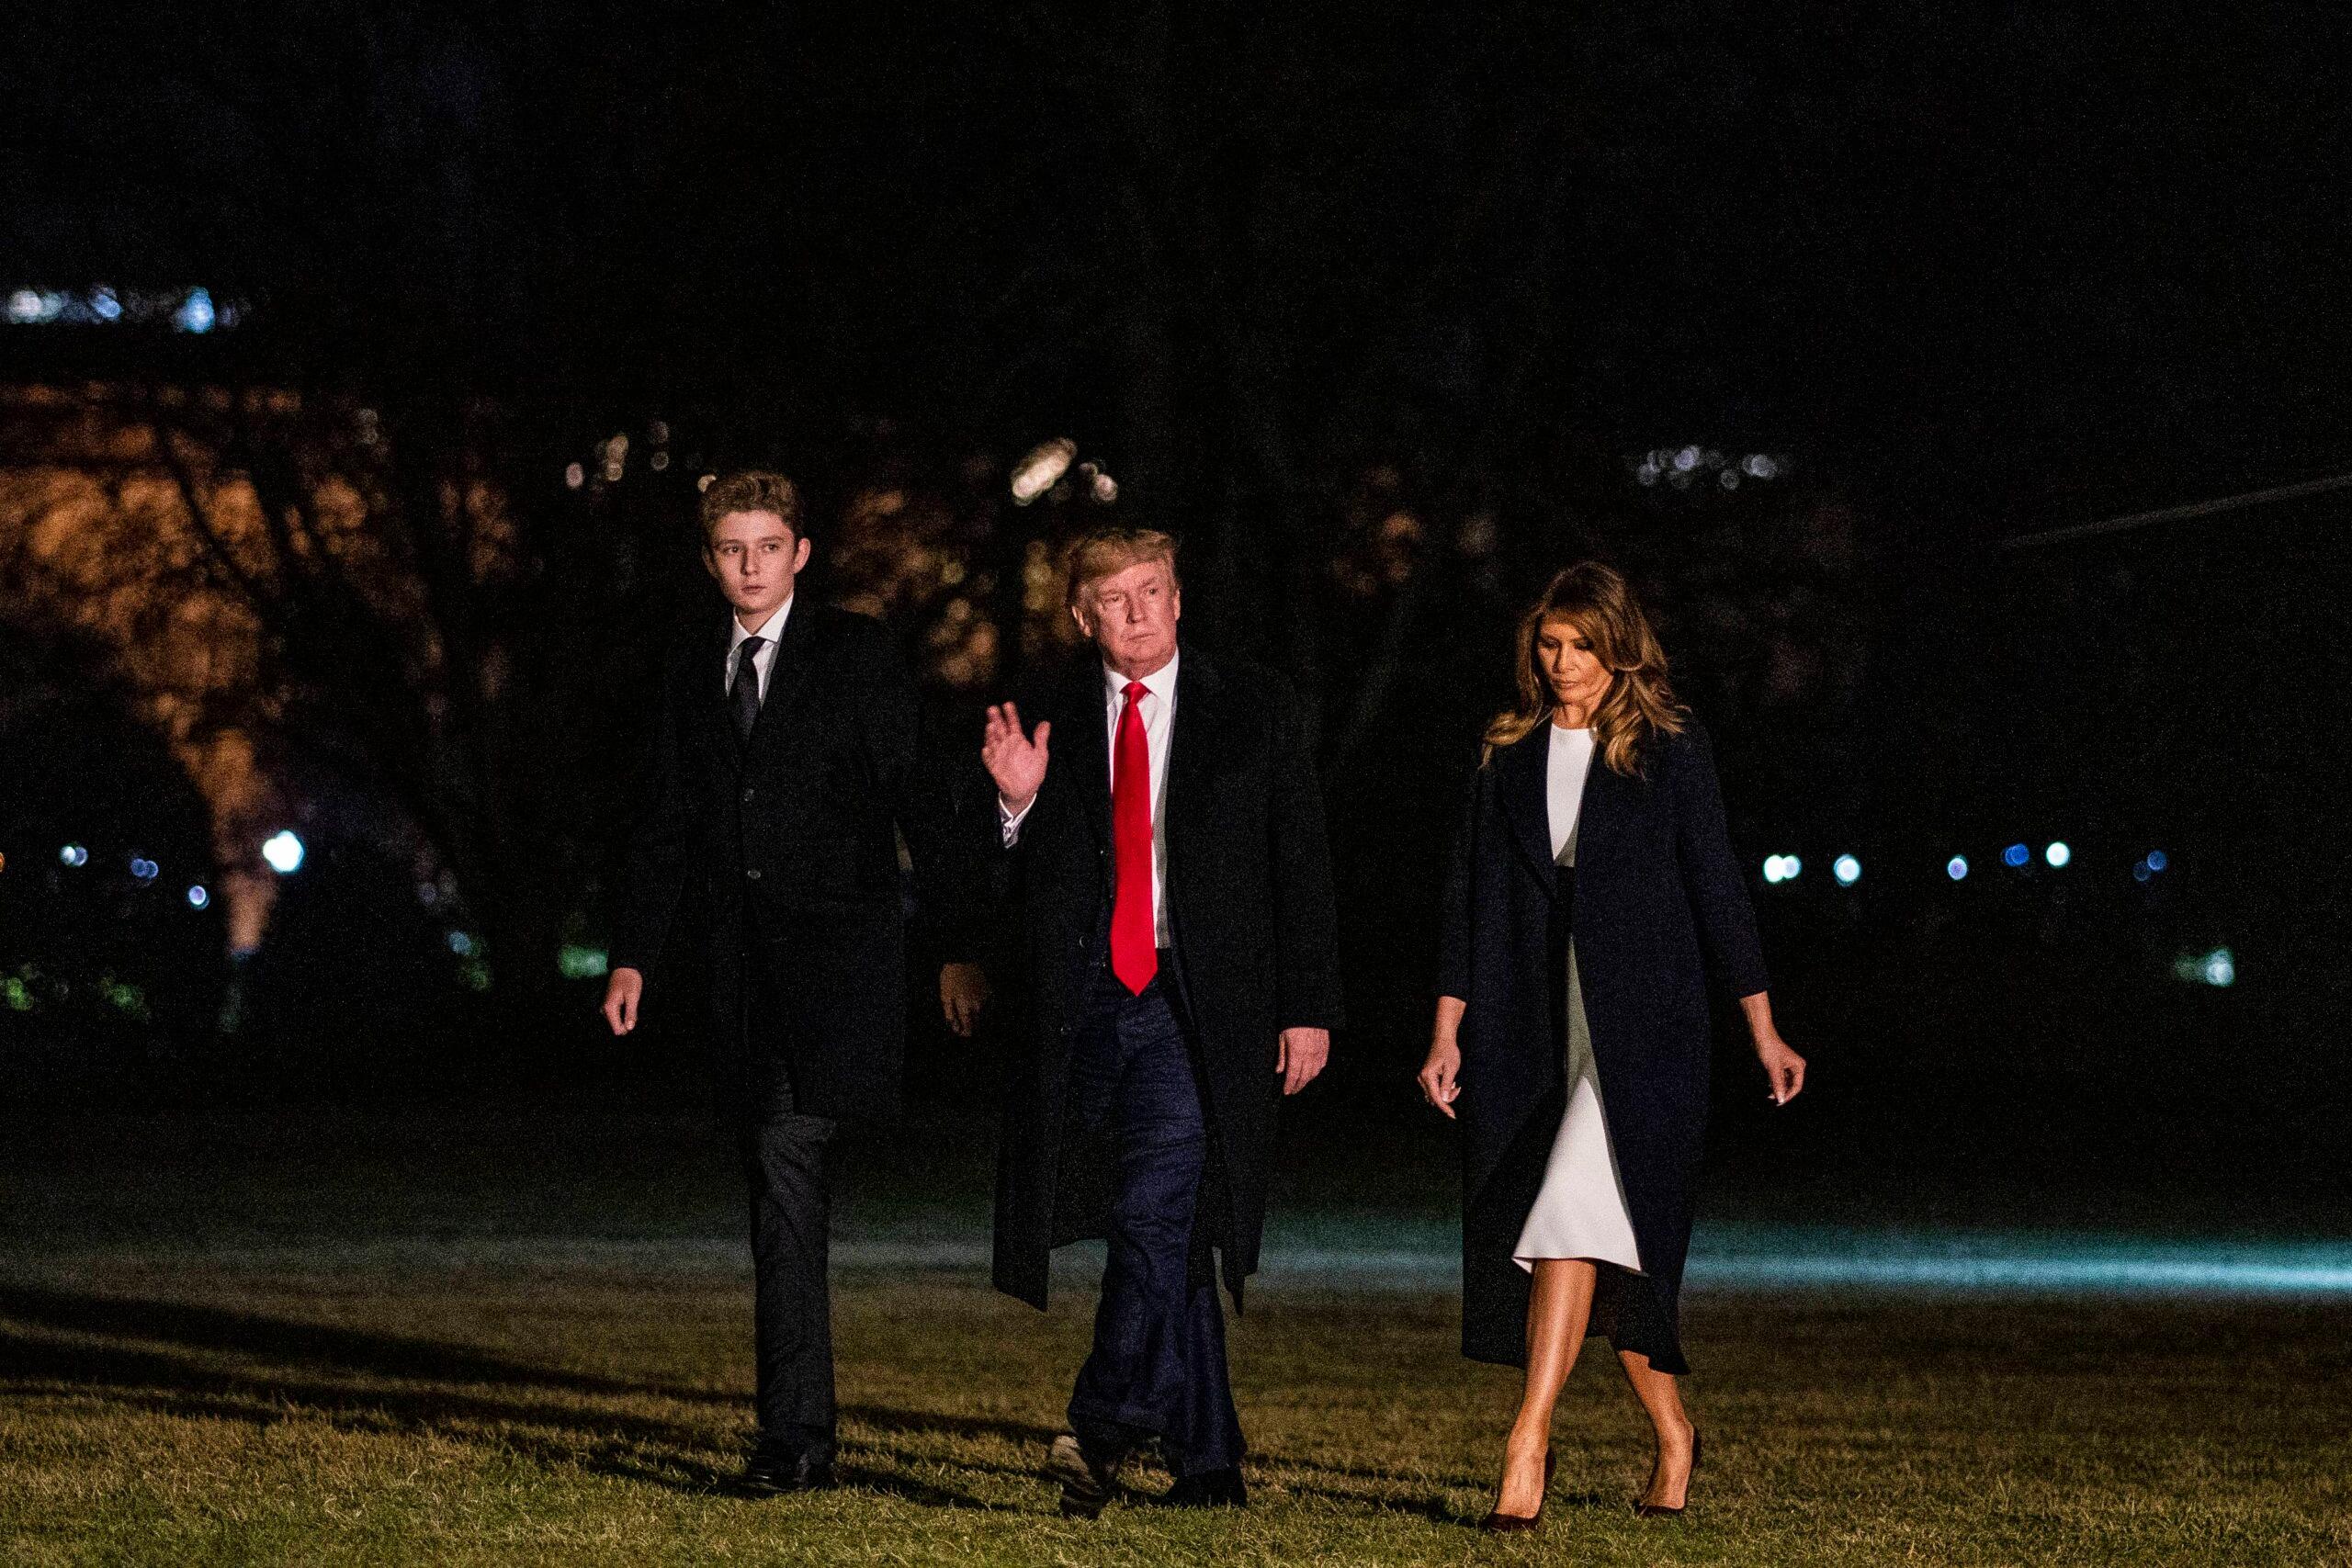 Barron Trump's 'Deep' Voice Shocks Fans As They Claim 'He Sounds Like' His Father Donald Trump